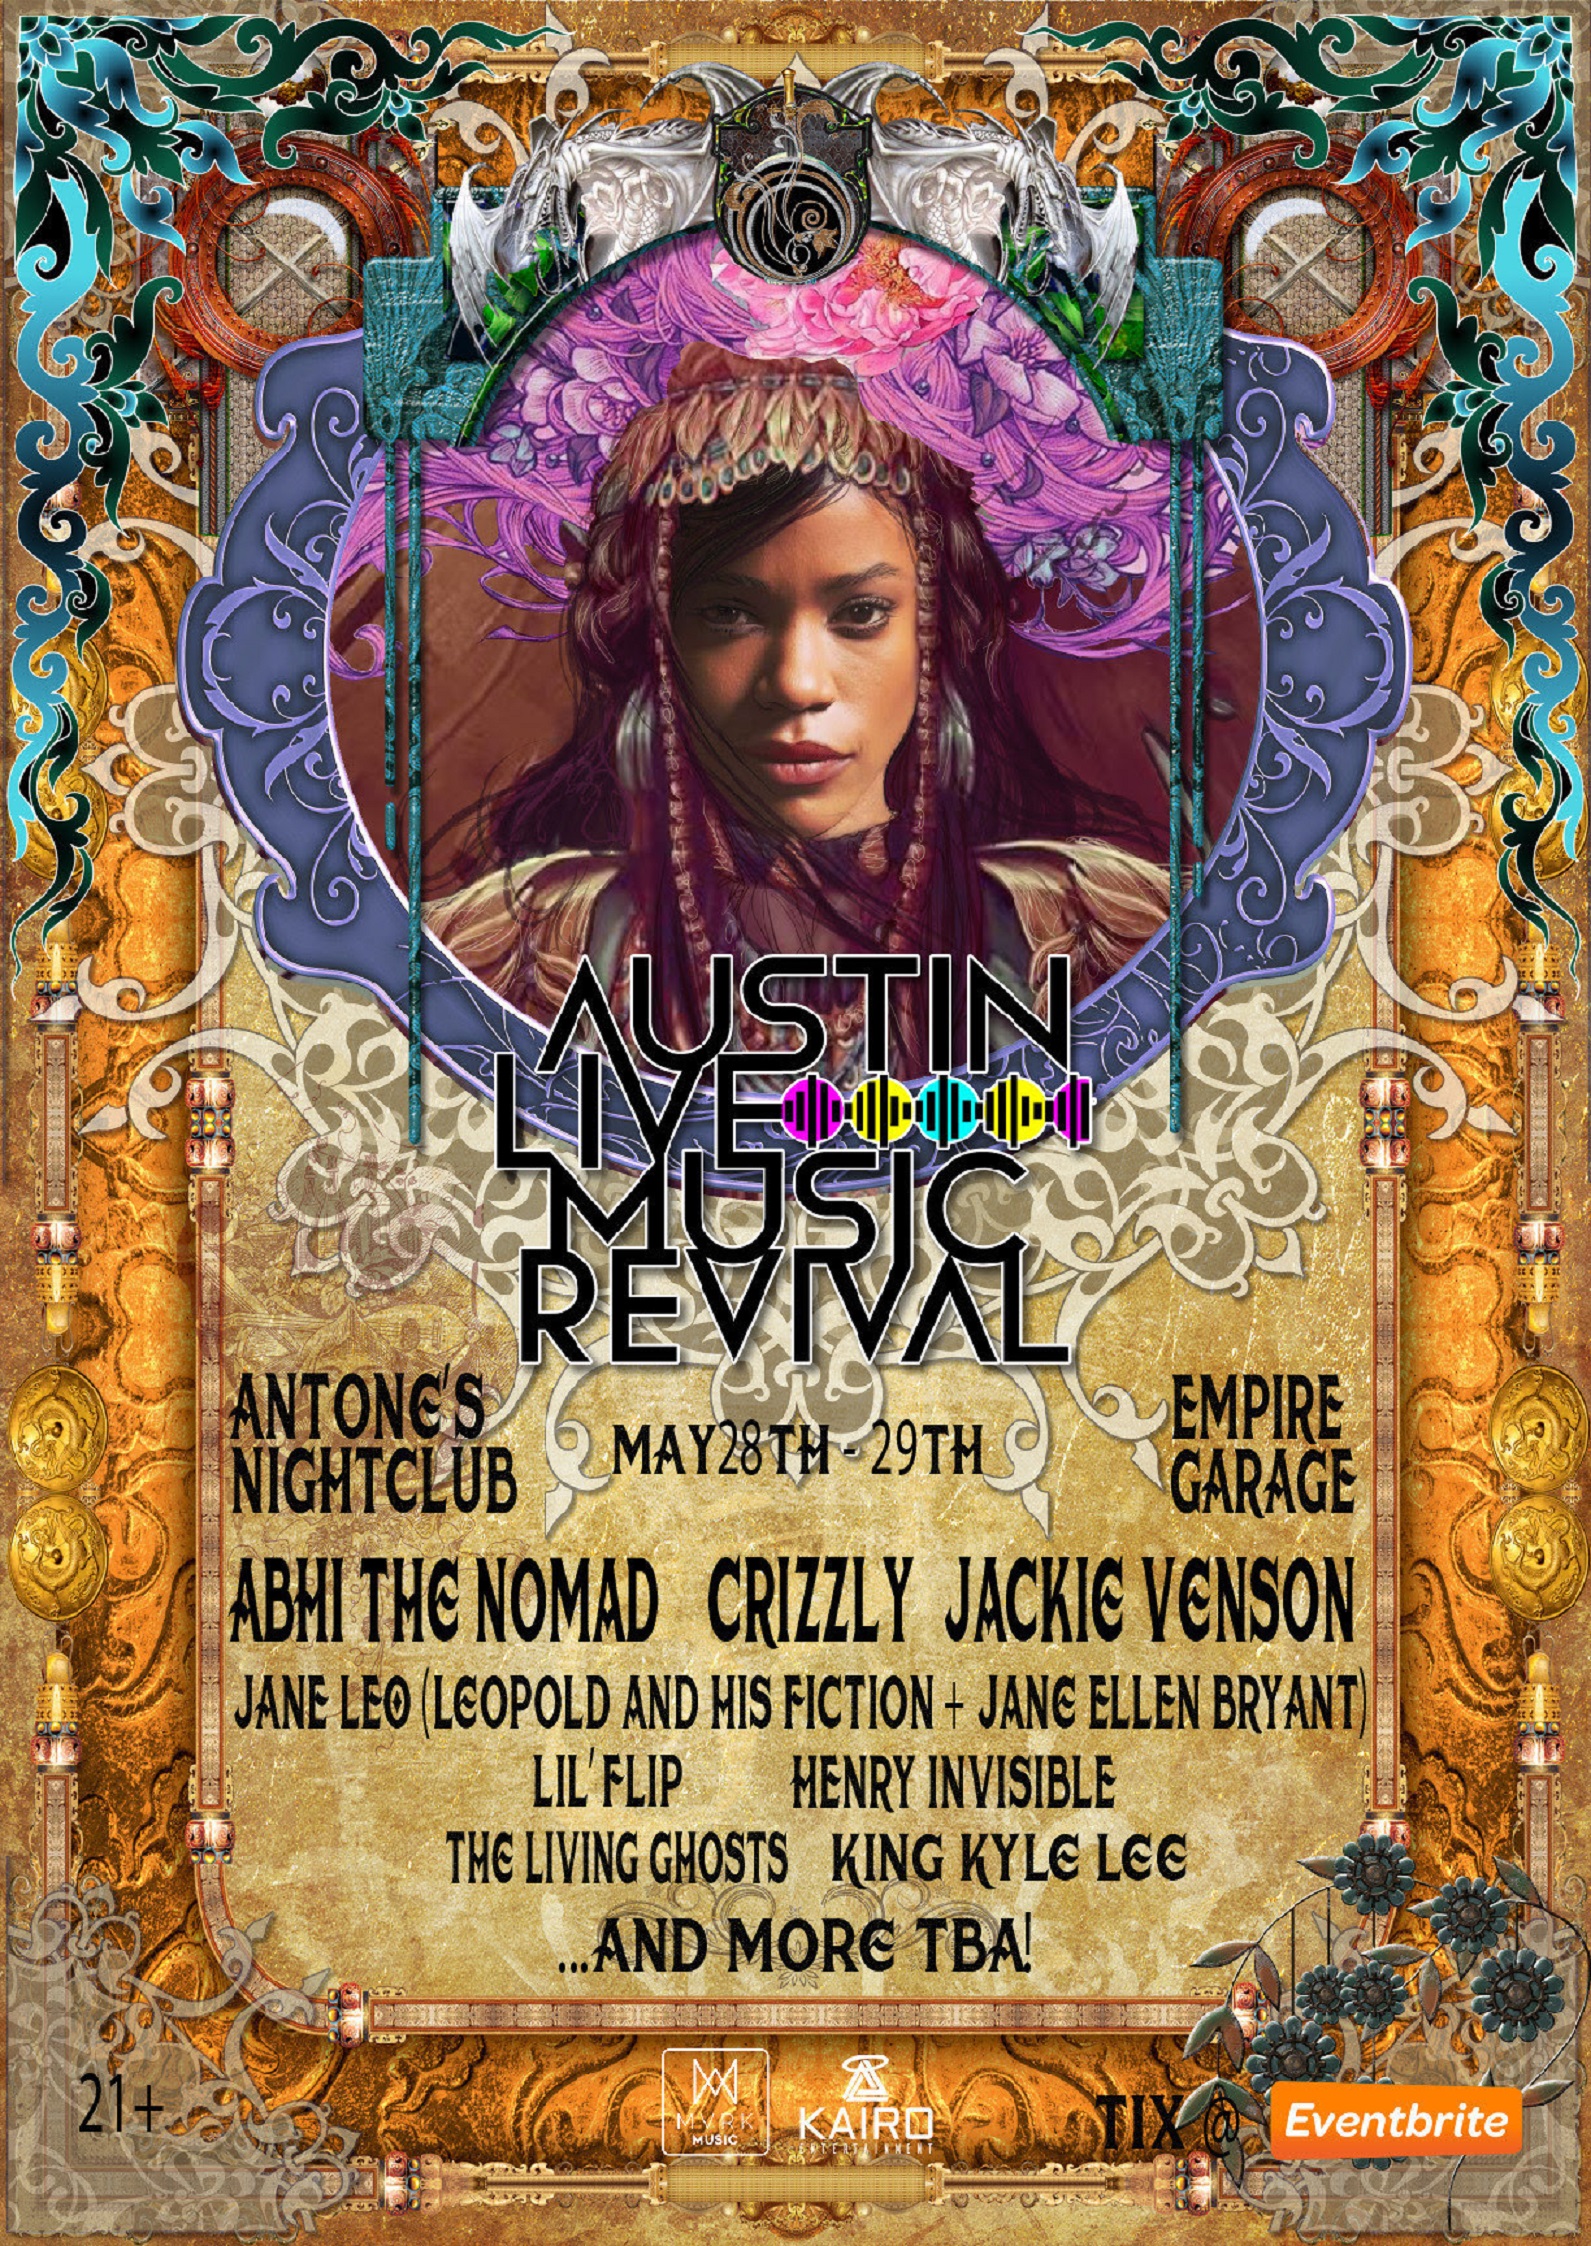  ABHI THE NOMAD, JACKIE VENSON, CRIZZLY AND LIL’ FLIP TO HEADLINE AUSTIN LIVE MUSIC REVIVAL